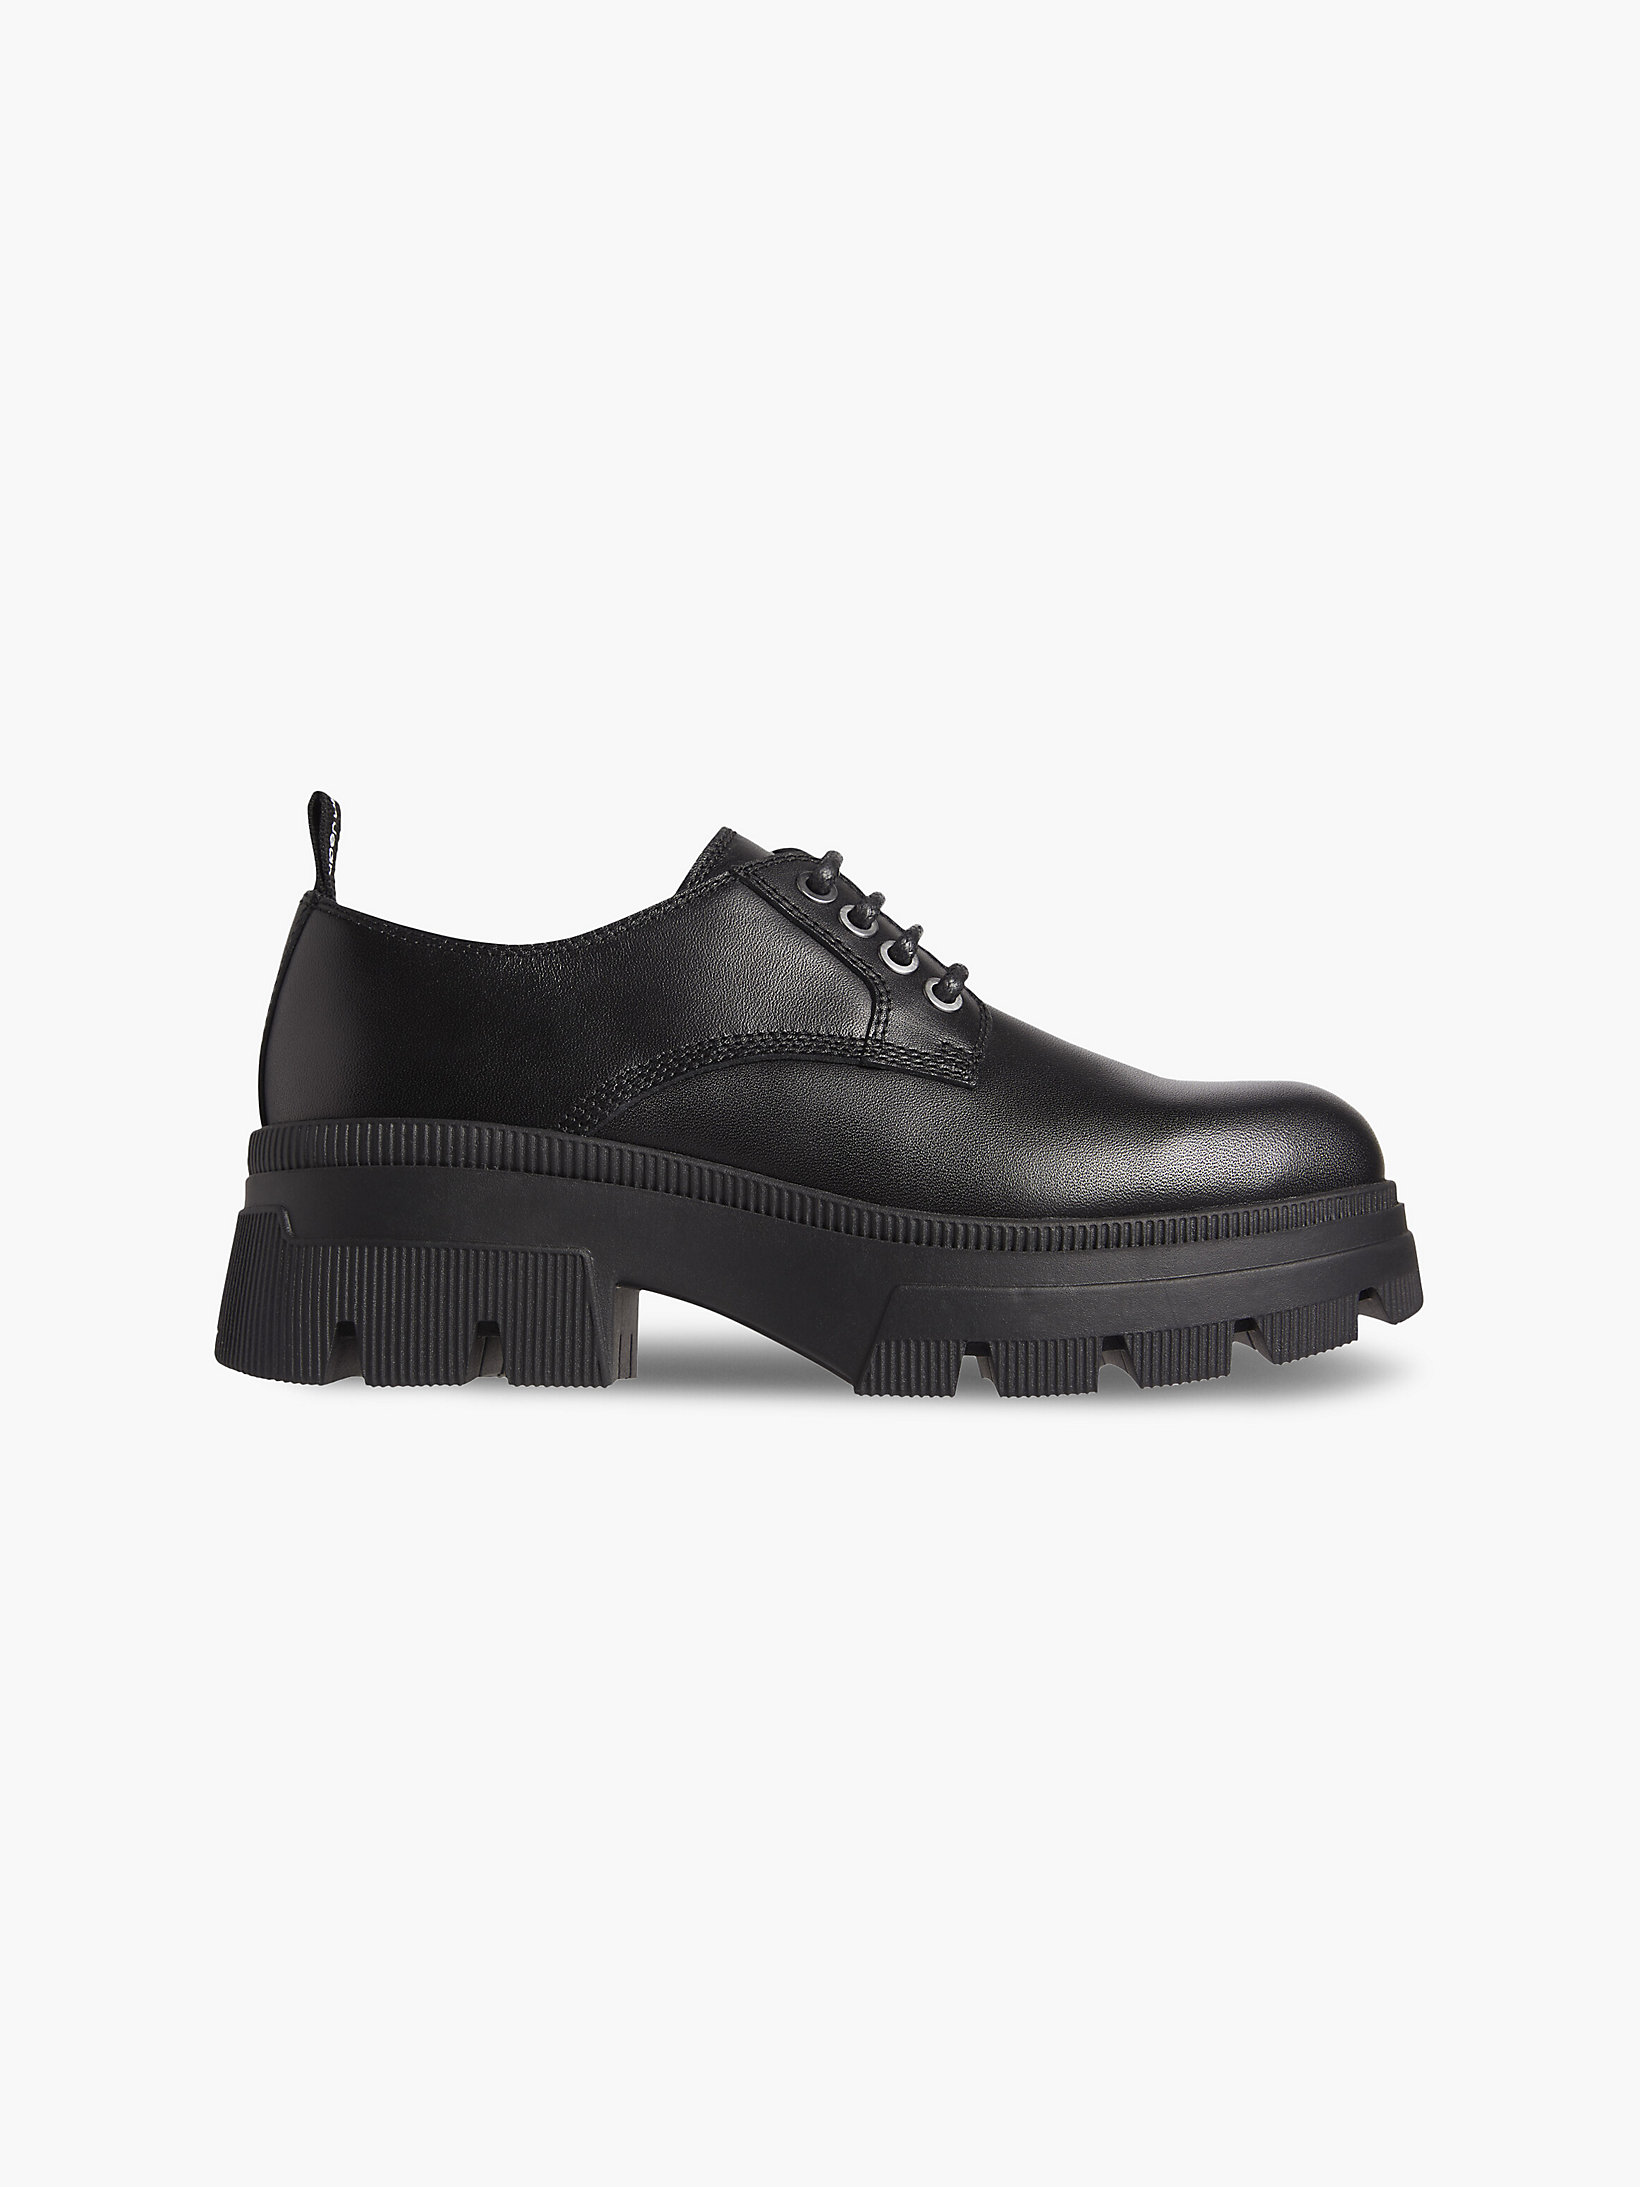 Black Leather Chunky Lace-Up Shoes undefined women Calvin Klein